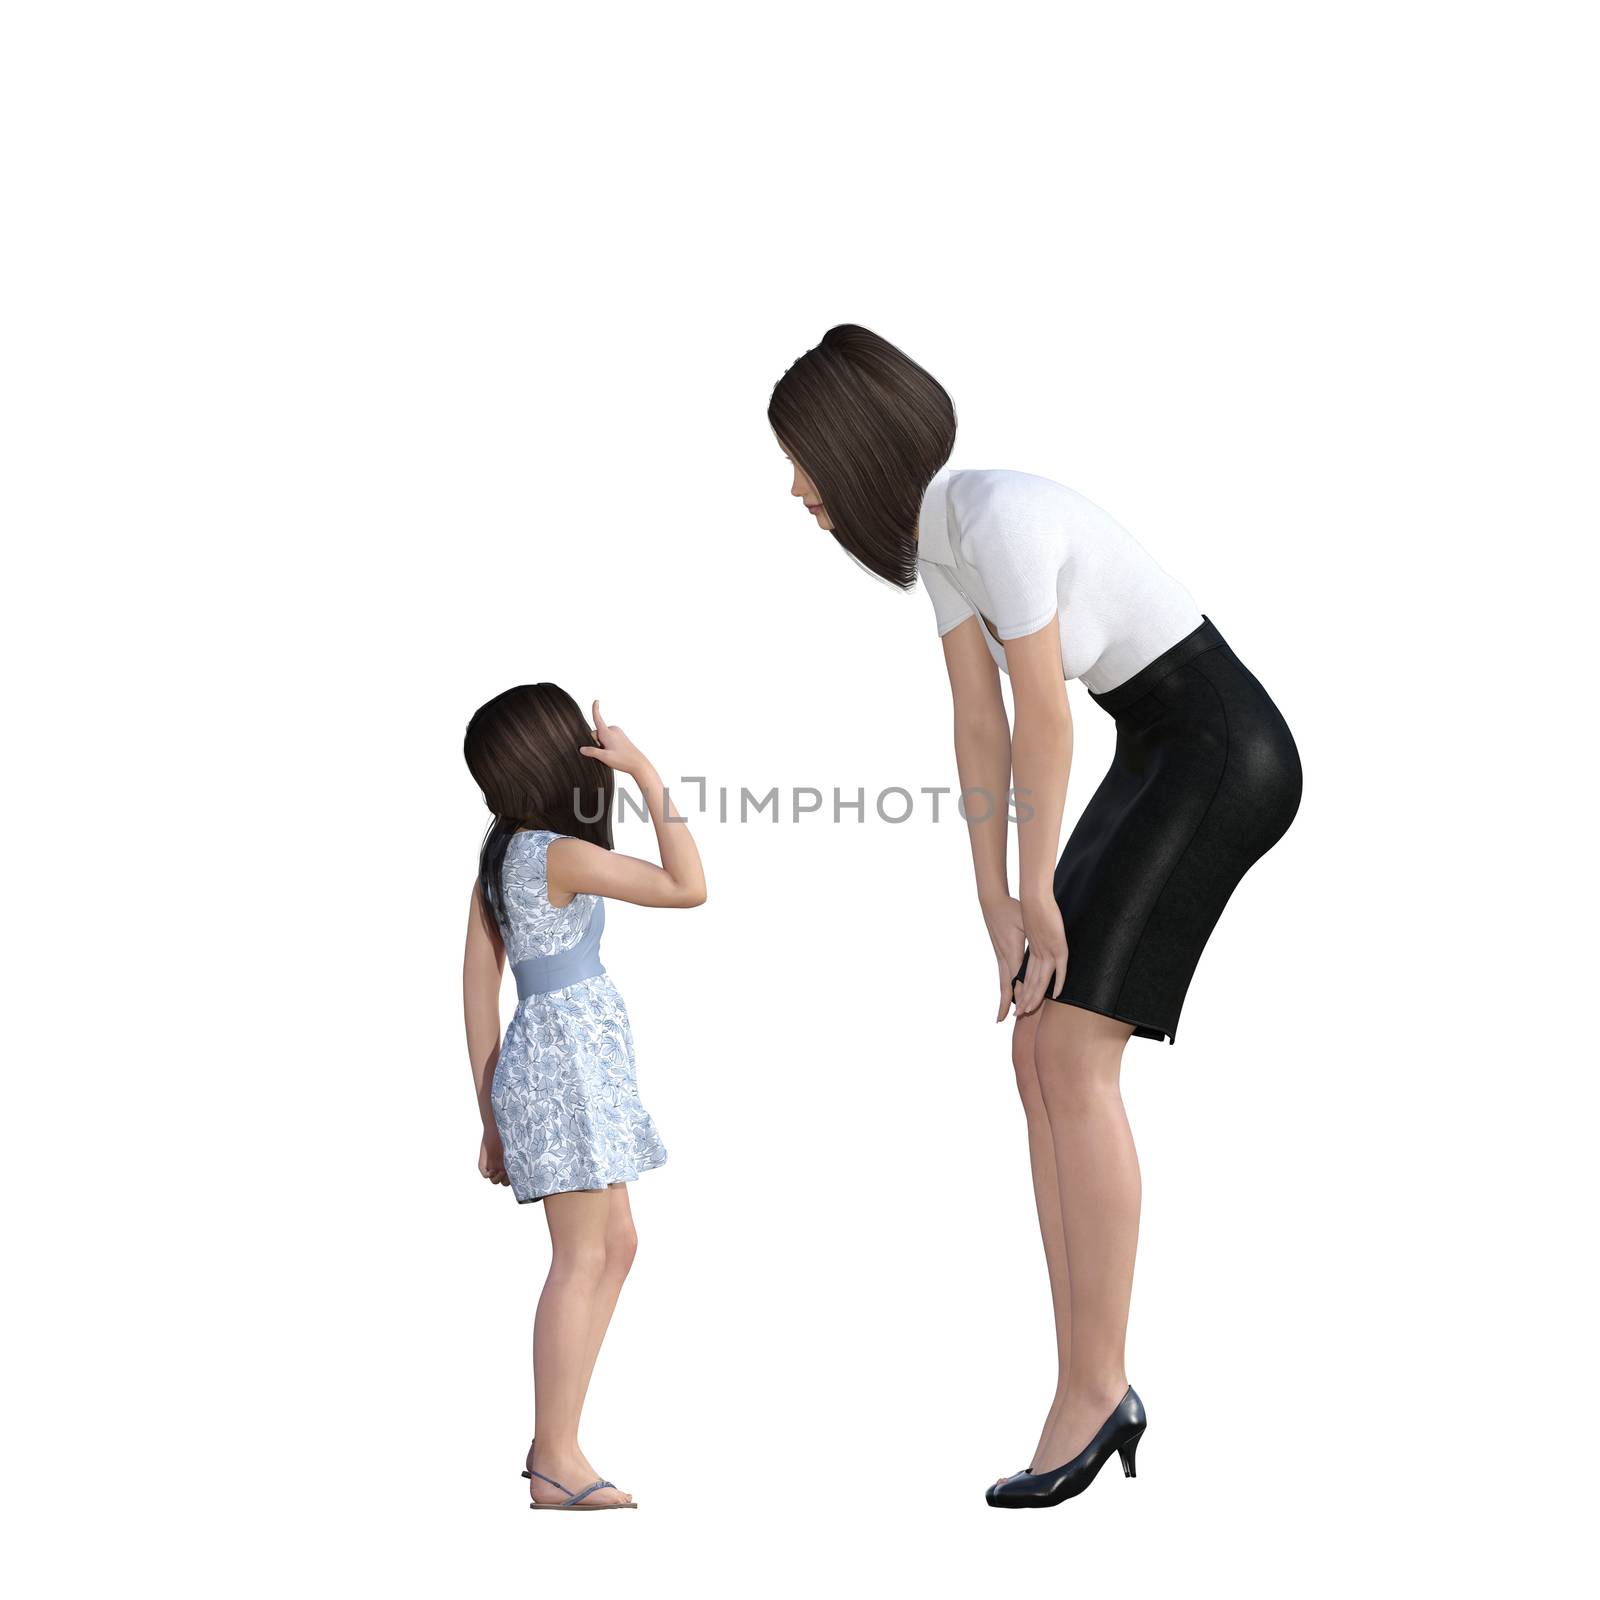 Mother Daughter Interaction of Girl Explaining Something as an Illustration Concept